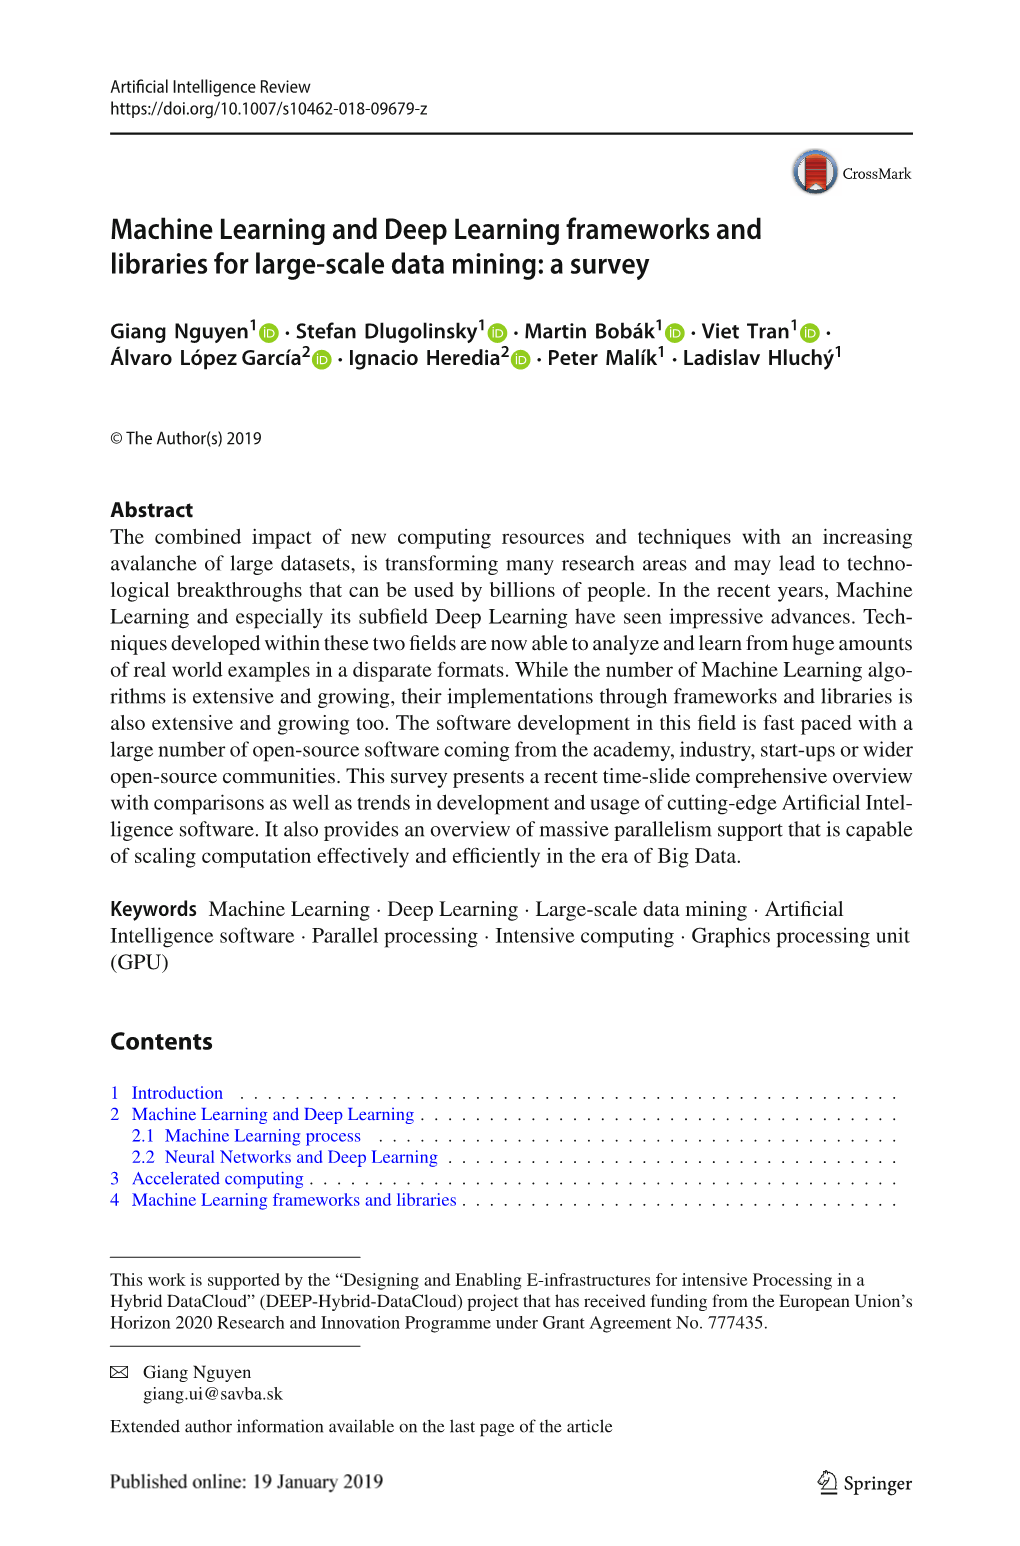 Machine Learning and Deep Learning Frameworks and Libraries for Large-Scale Data Mining: a Survey